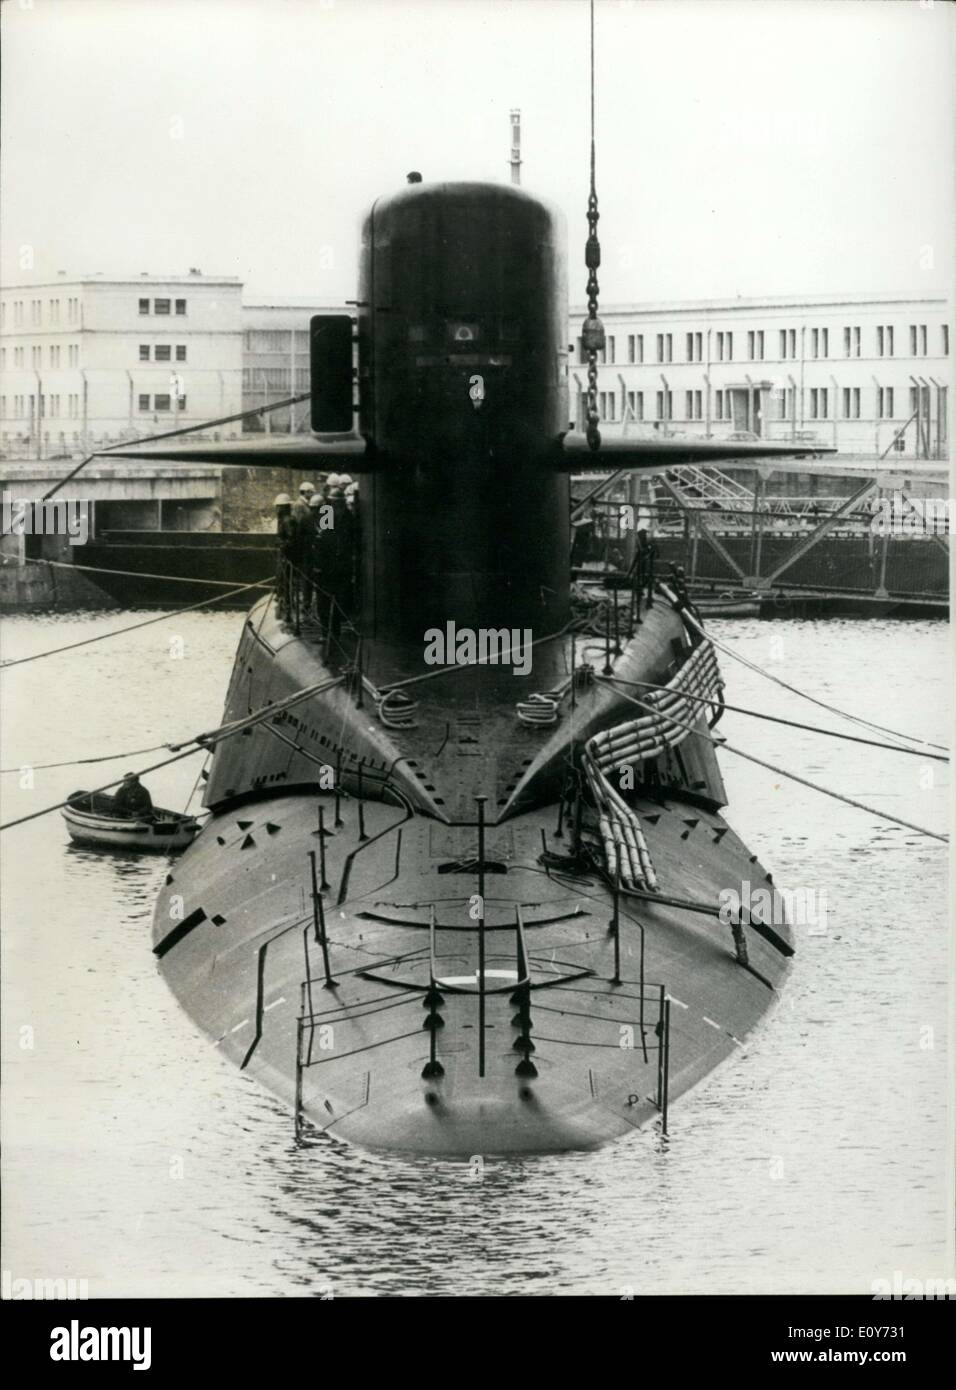 Mar. 20, 1969 - The first nuclear submarine, the ''Redoutable'' is 128 meters long, 10.60 meters wide, and deplaces 8,000 tons of water on the surface and 9,000 tons of water underneath the surface. It travels at 20-25 knots produced by a nuclear motor with power around 20,000 CV. It can travel at anywhere from 300 meter depths to 500 meter depths. It should be in working service by the end of 1971, give or take a year. Picture: The nuclear submarine ''Redoutable'' afloat in Cherbourg's port. Stock Photo